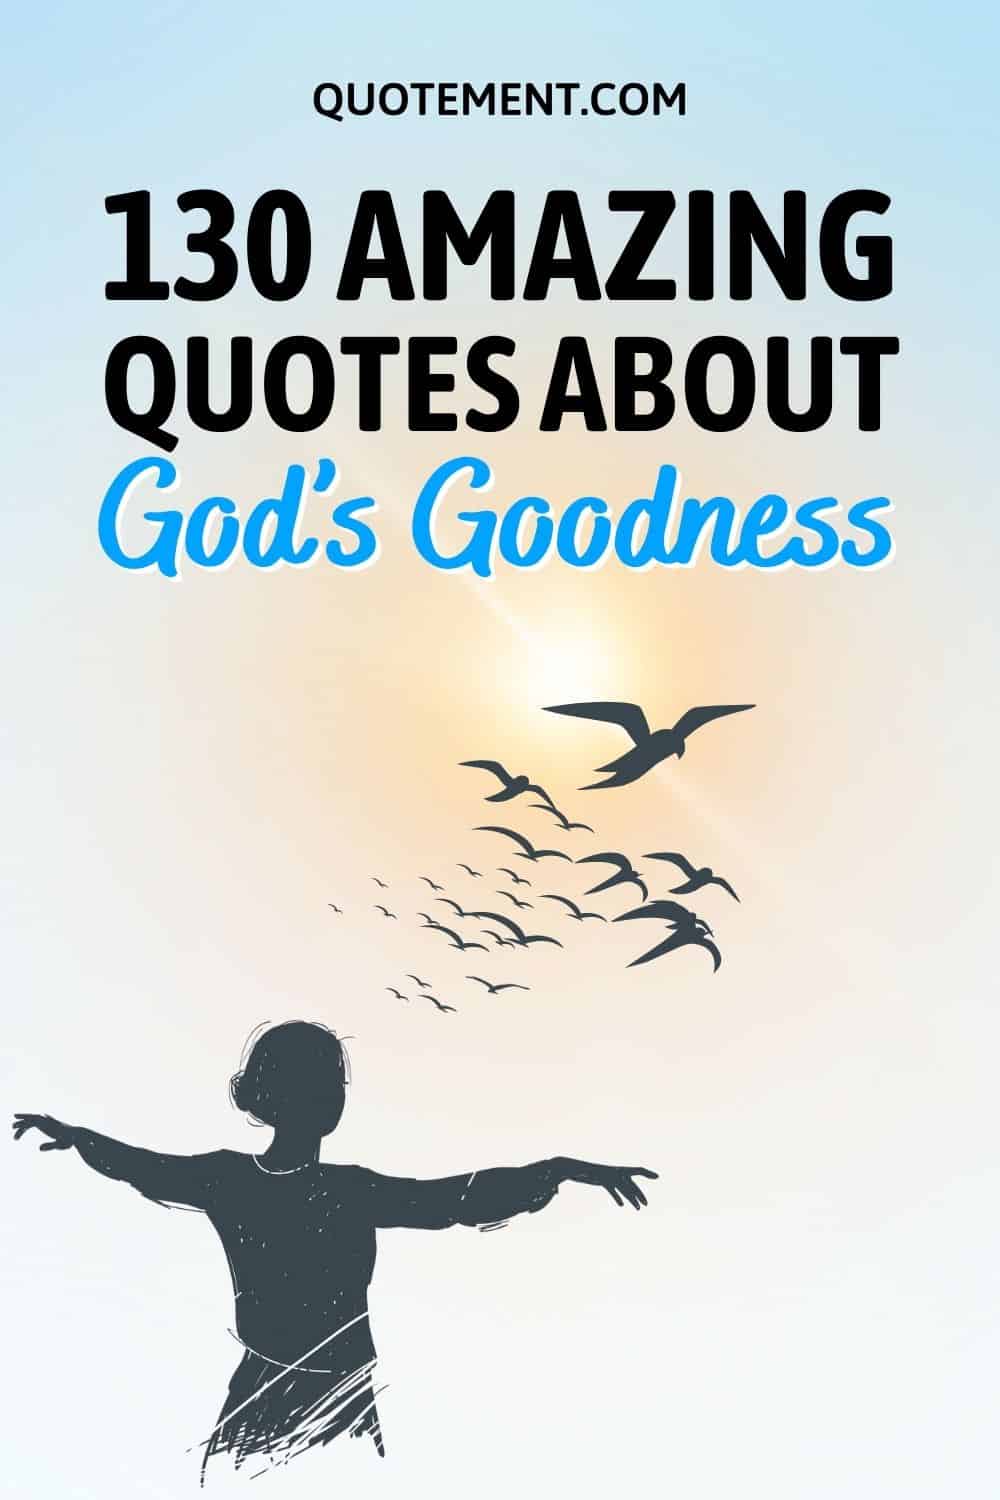 130 Quotes About God’s Goodness To Strengthen Your Faith
